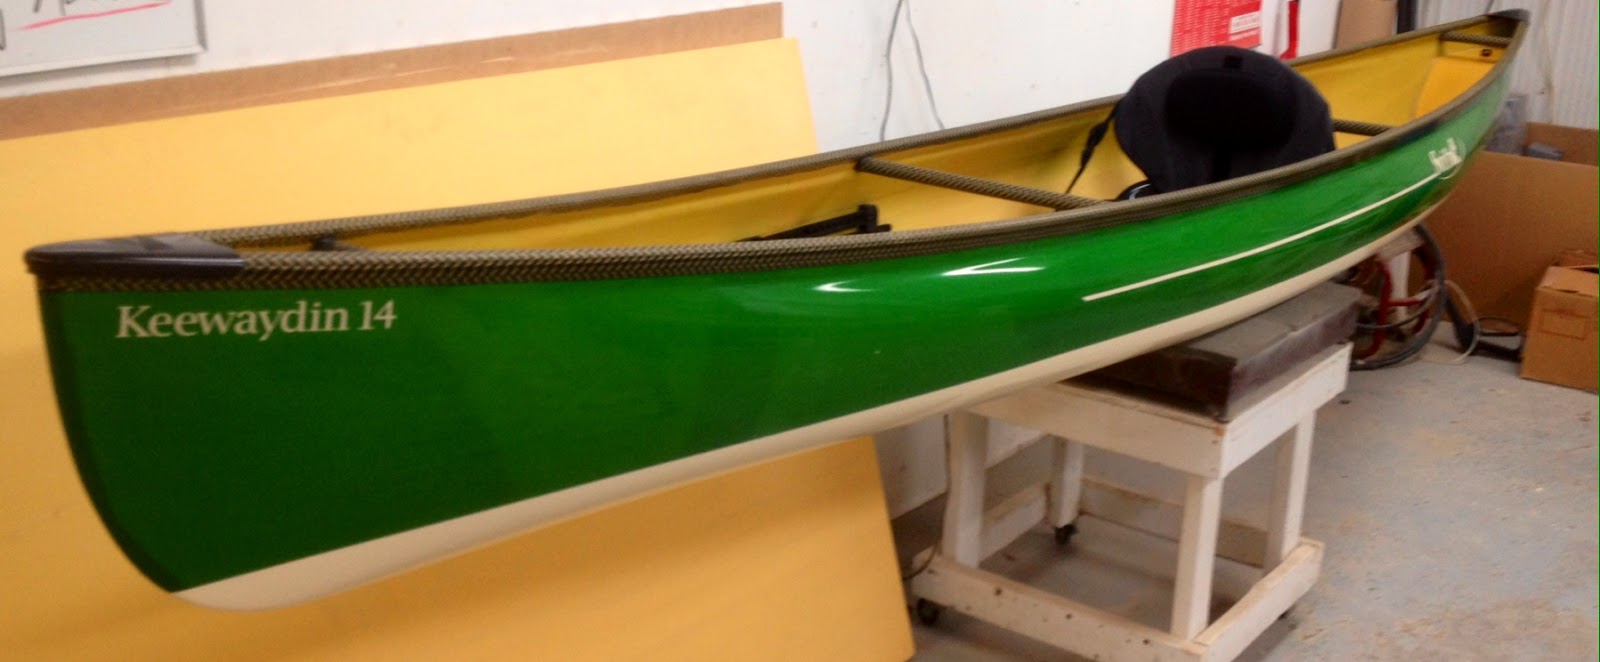 Swift Outdoor Centre: Welcome to the 2015 Swift Canoe 